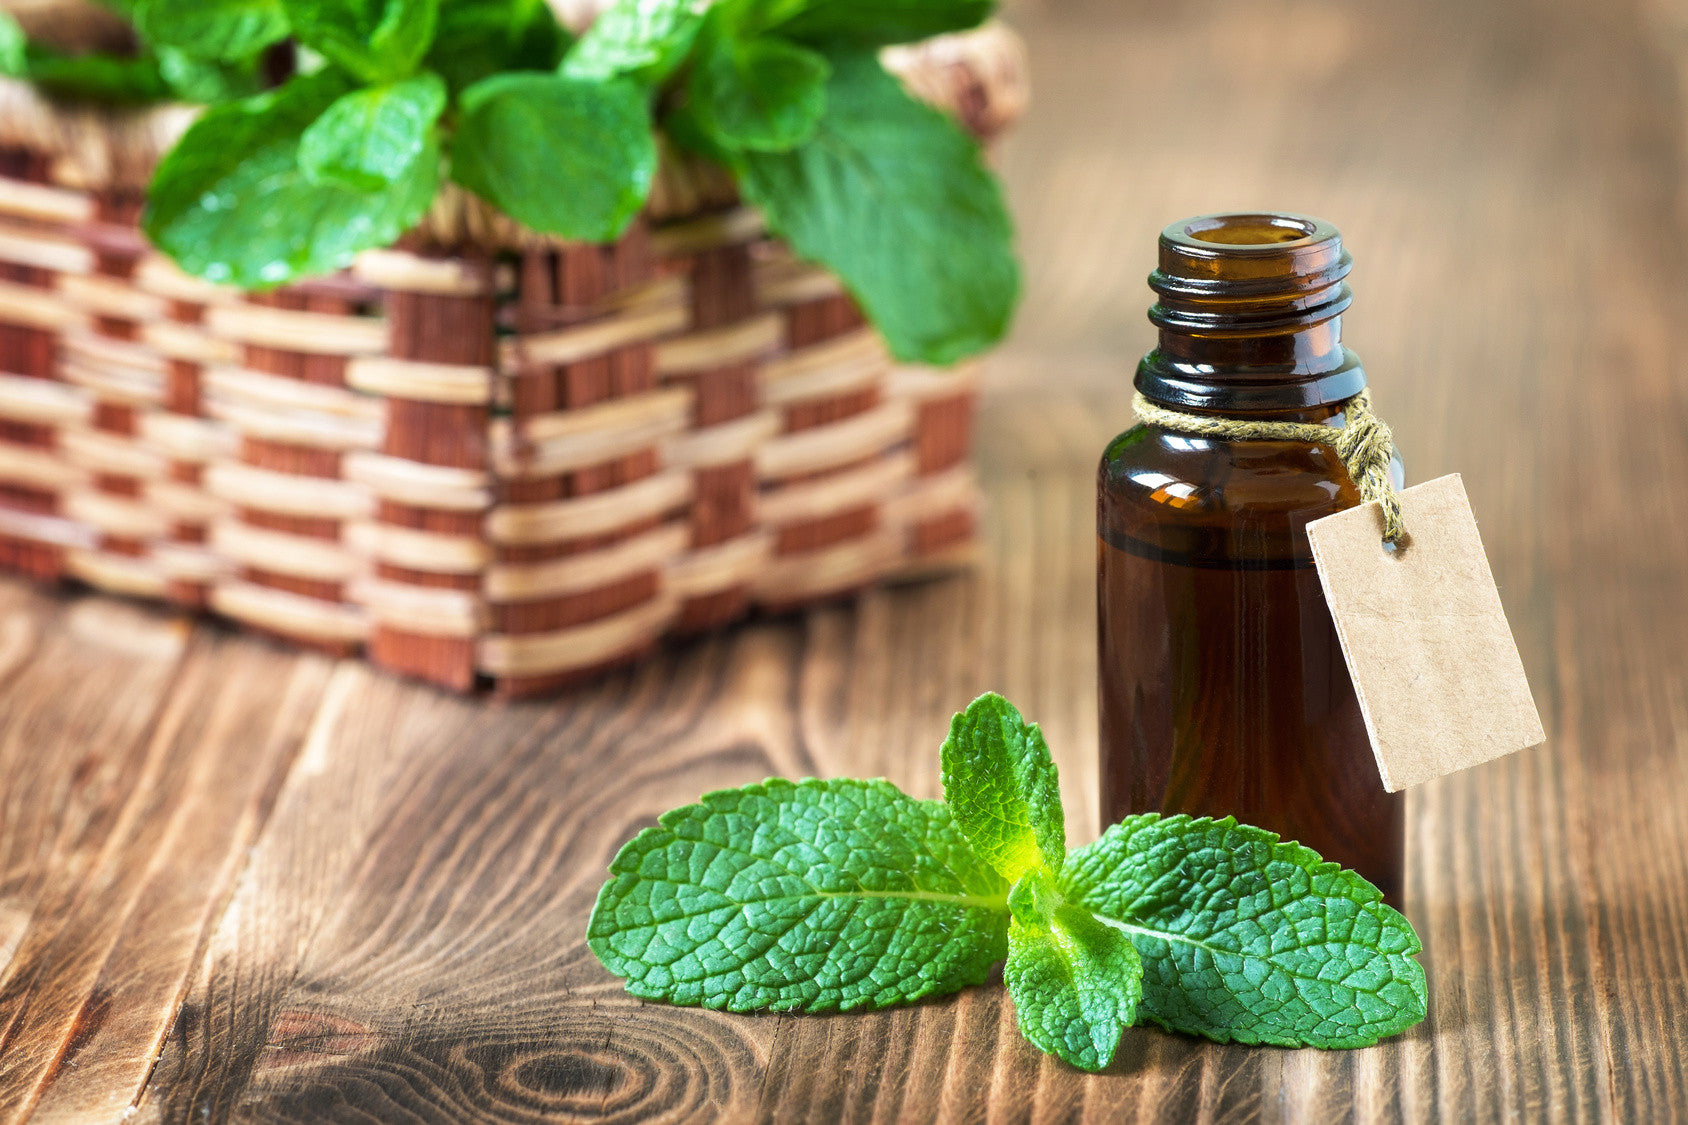 Top 35 Remarkable Uses and Benefits of Peppermint Essential Oil Here are top 35 remarkable peppermint oil uses and benefits: Peppermint Oil for Digestion Peppermint Oil for Colds, Cough and Flu Peppermint Oil for Infants and Children Peppermint Oil for Pain Peppermint Oil for Skin Peppermint Oil for Hair Peppermint Oil for Oral Health Peppermint Oil for Focus, Energy & Stress Relief Peppermint Oil for Pest Control Other Surprising Uses of Peppermint Oil...